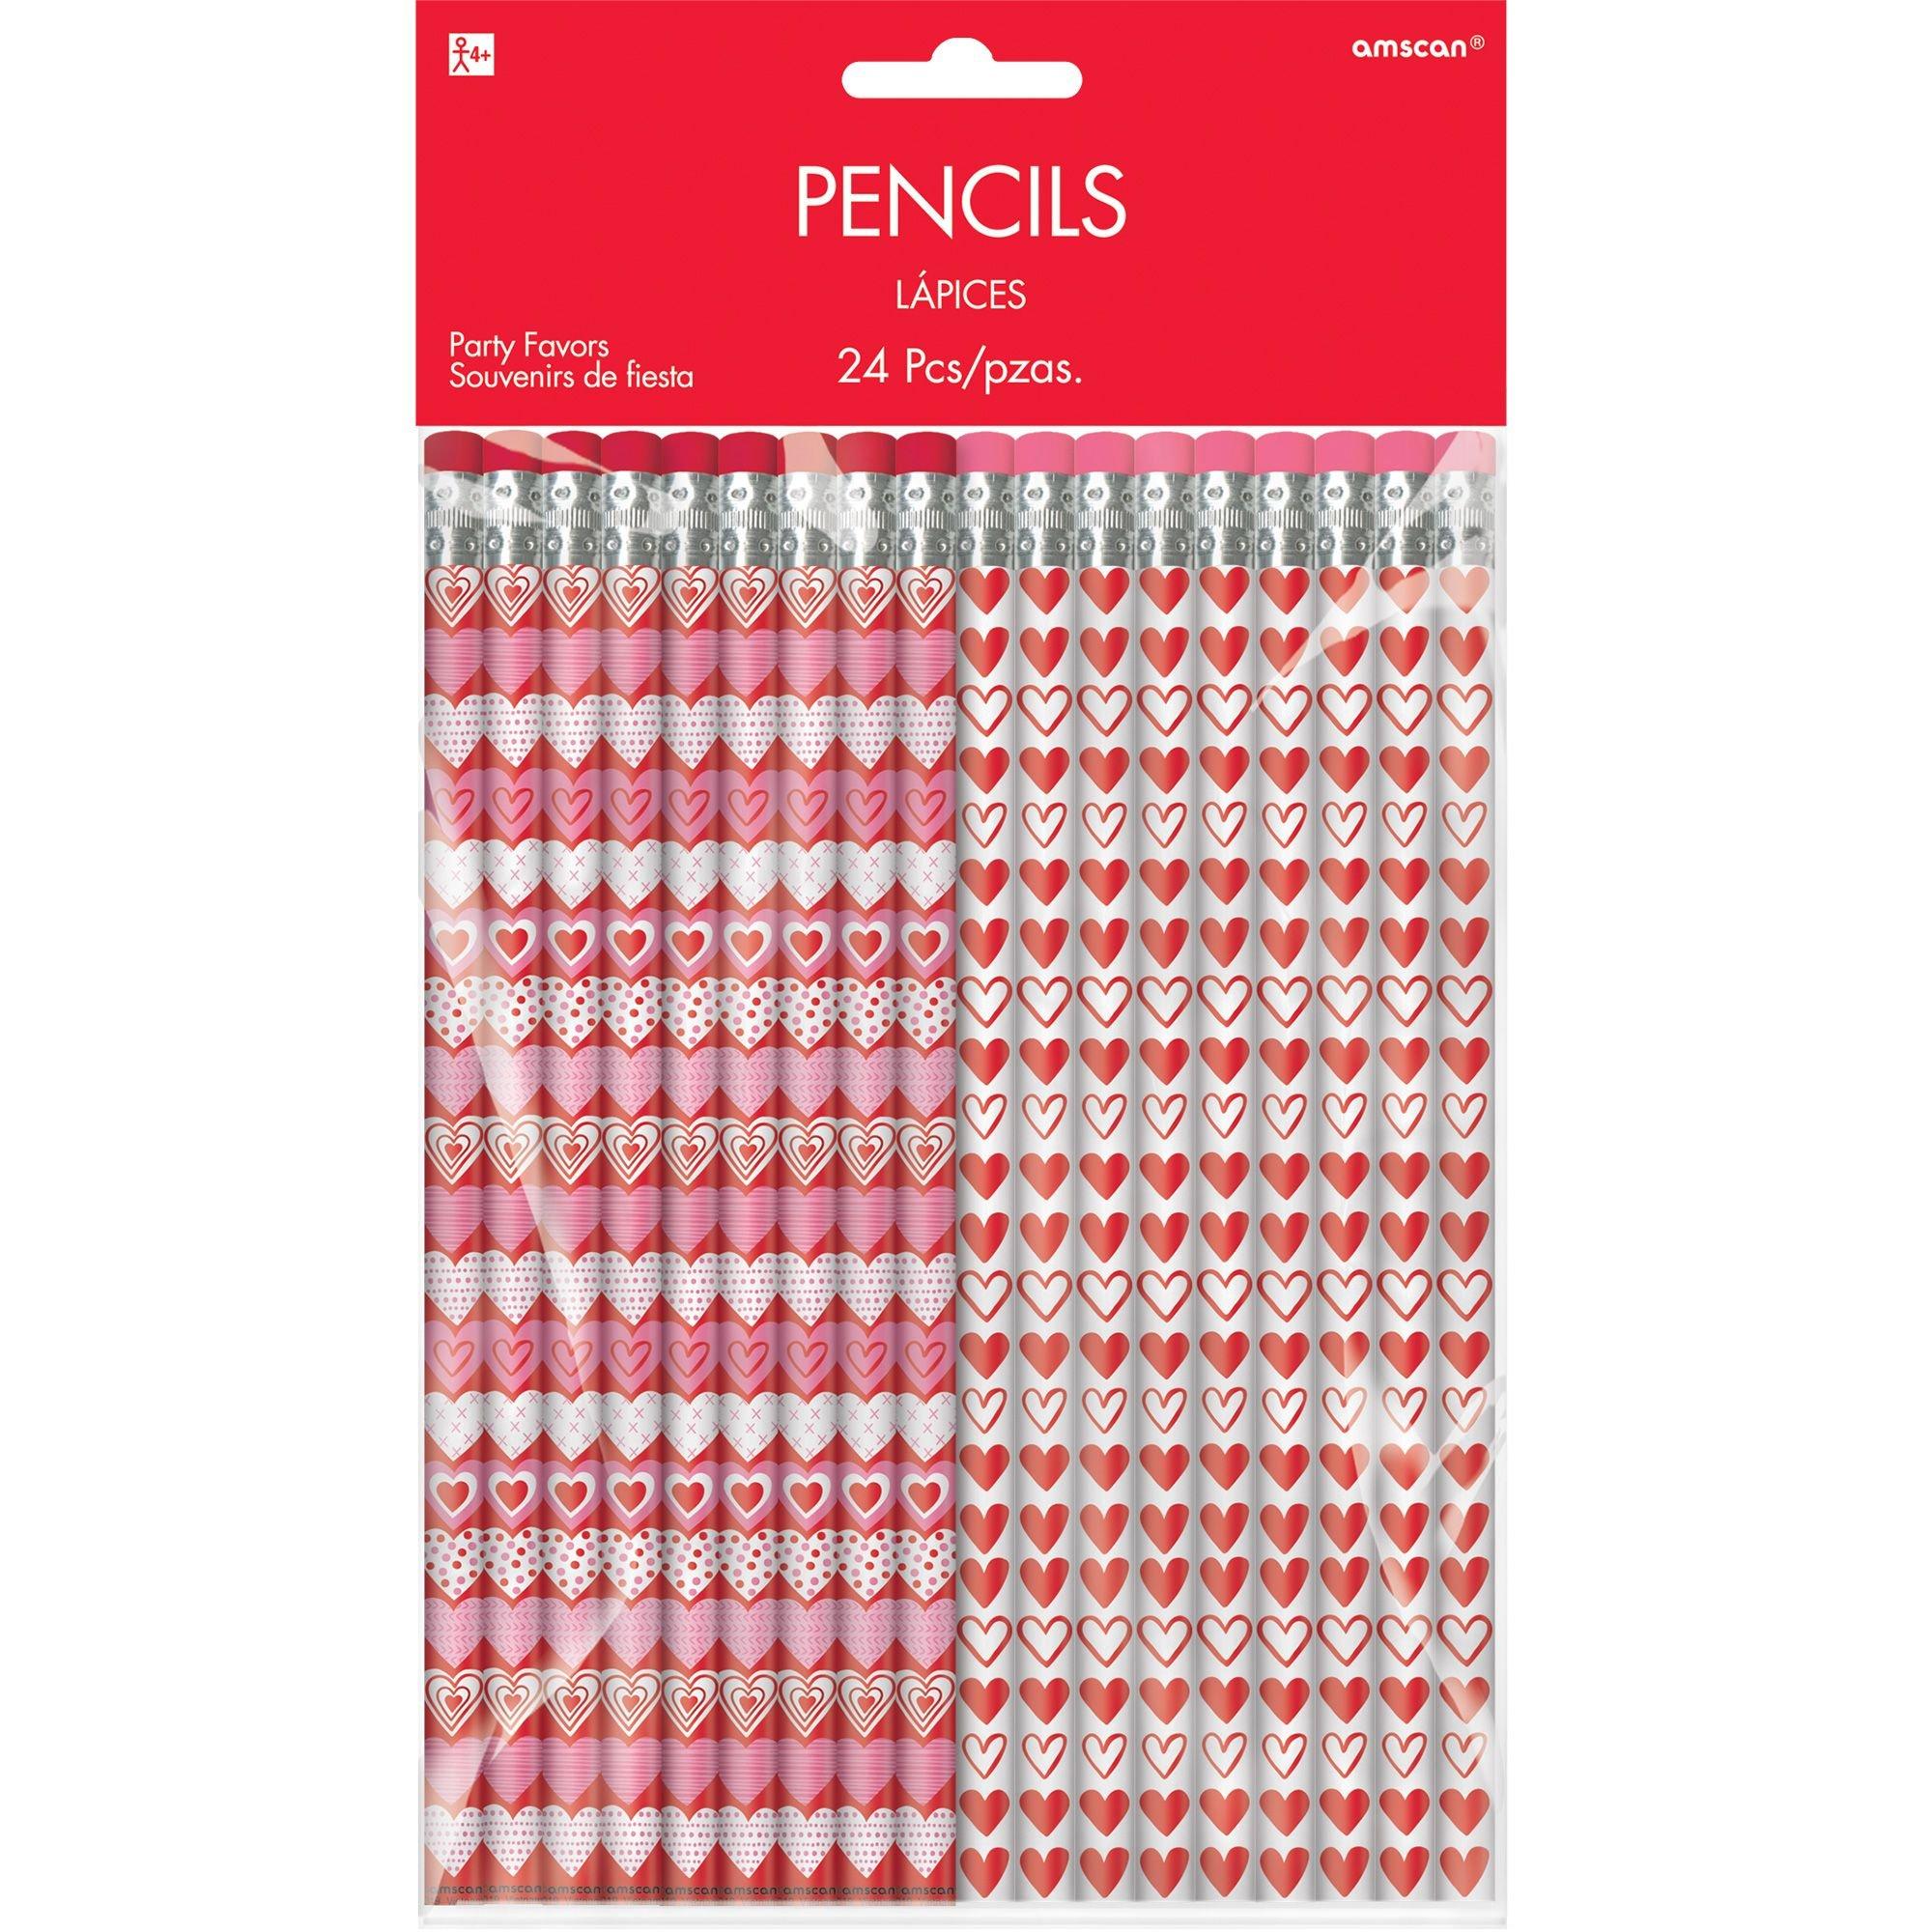 Way To Celebrate Valentine's Day Hearts & Butterflies Pencils, 10 Count